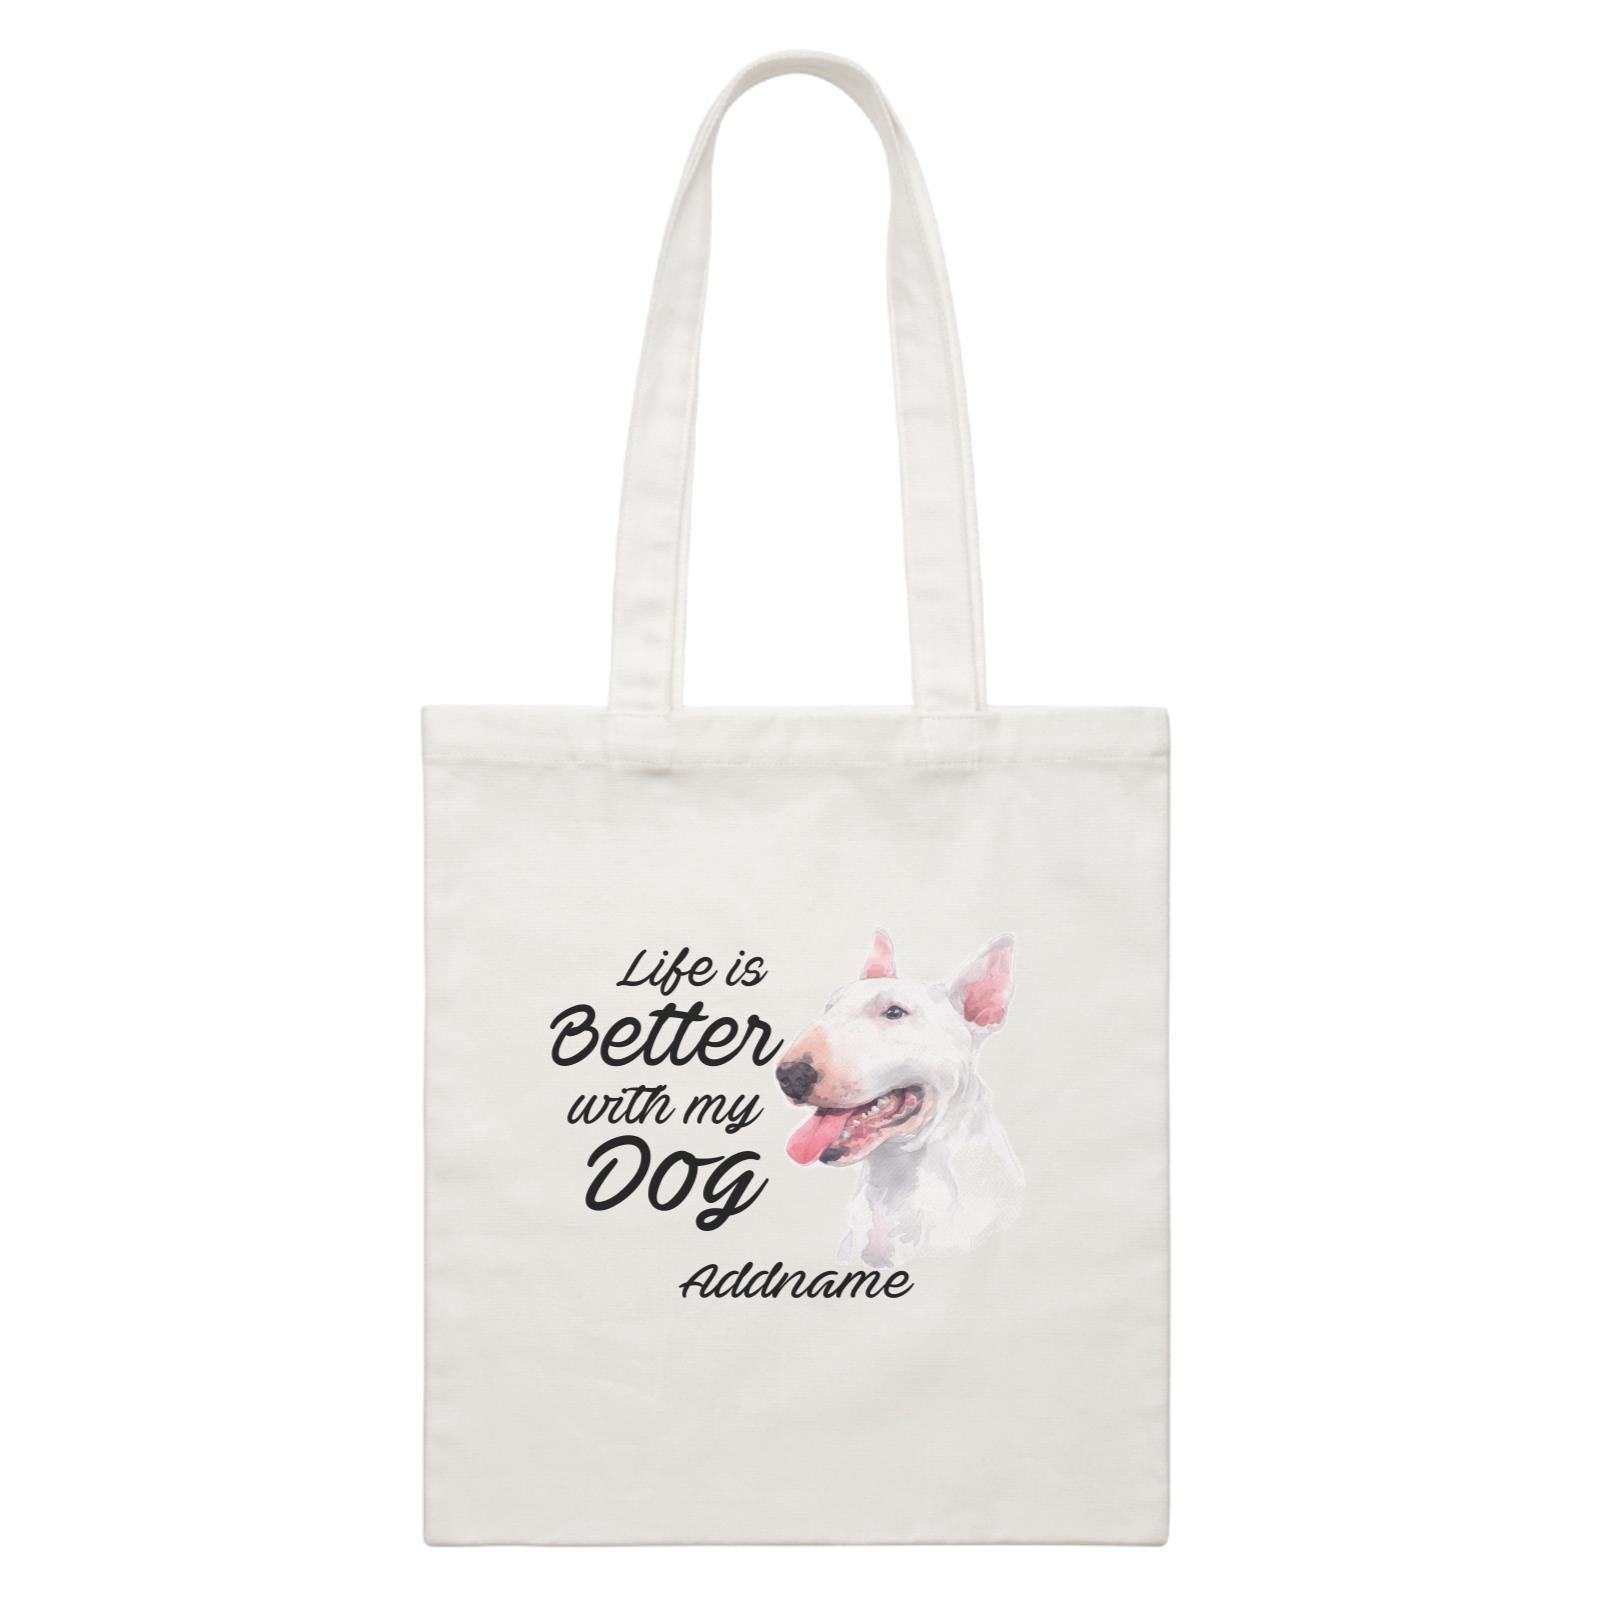 Watercolor Life is Better With My Dog Bull Terrier Addname White Canvas Bag